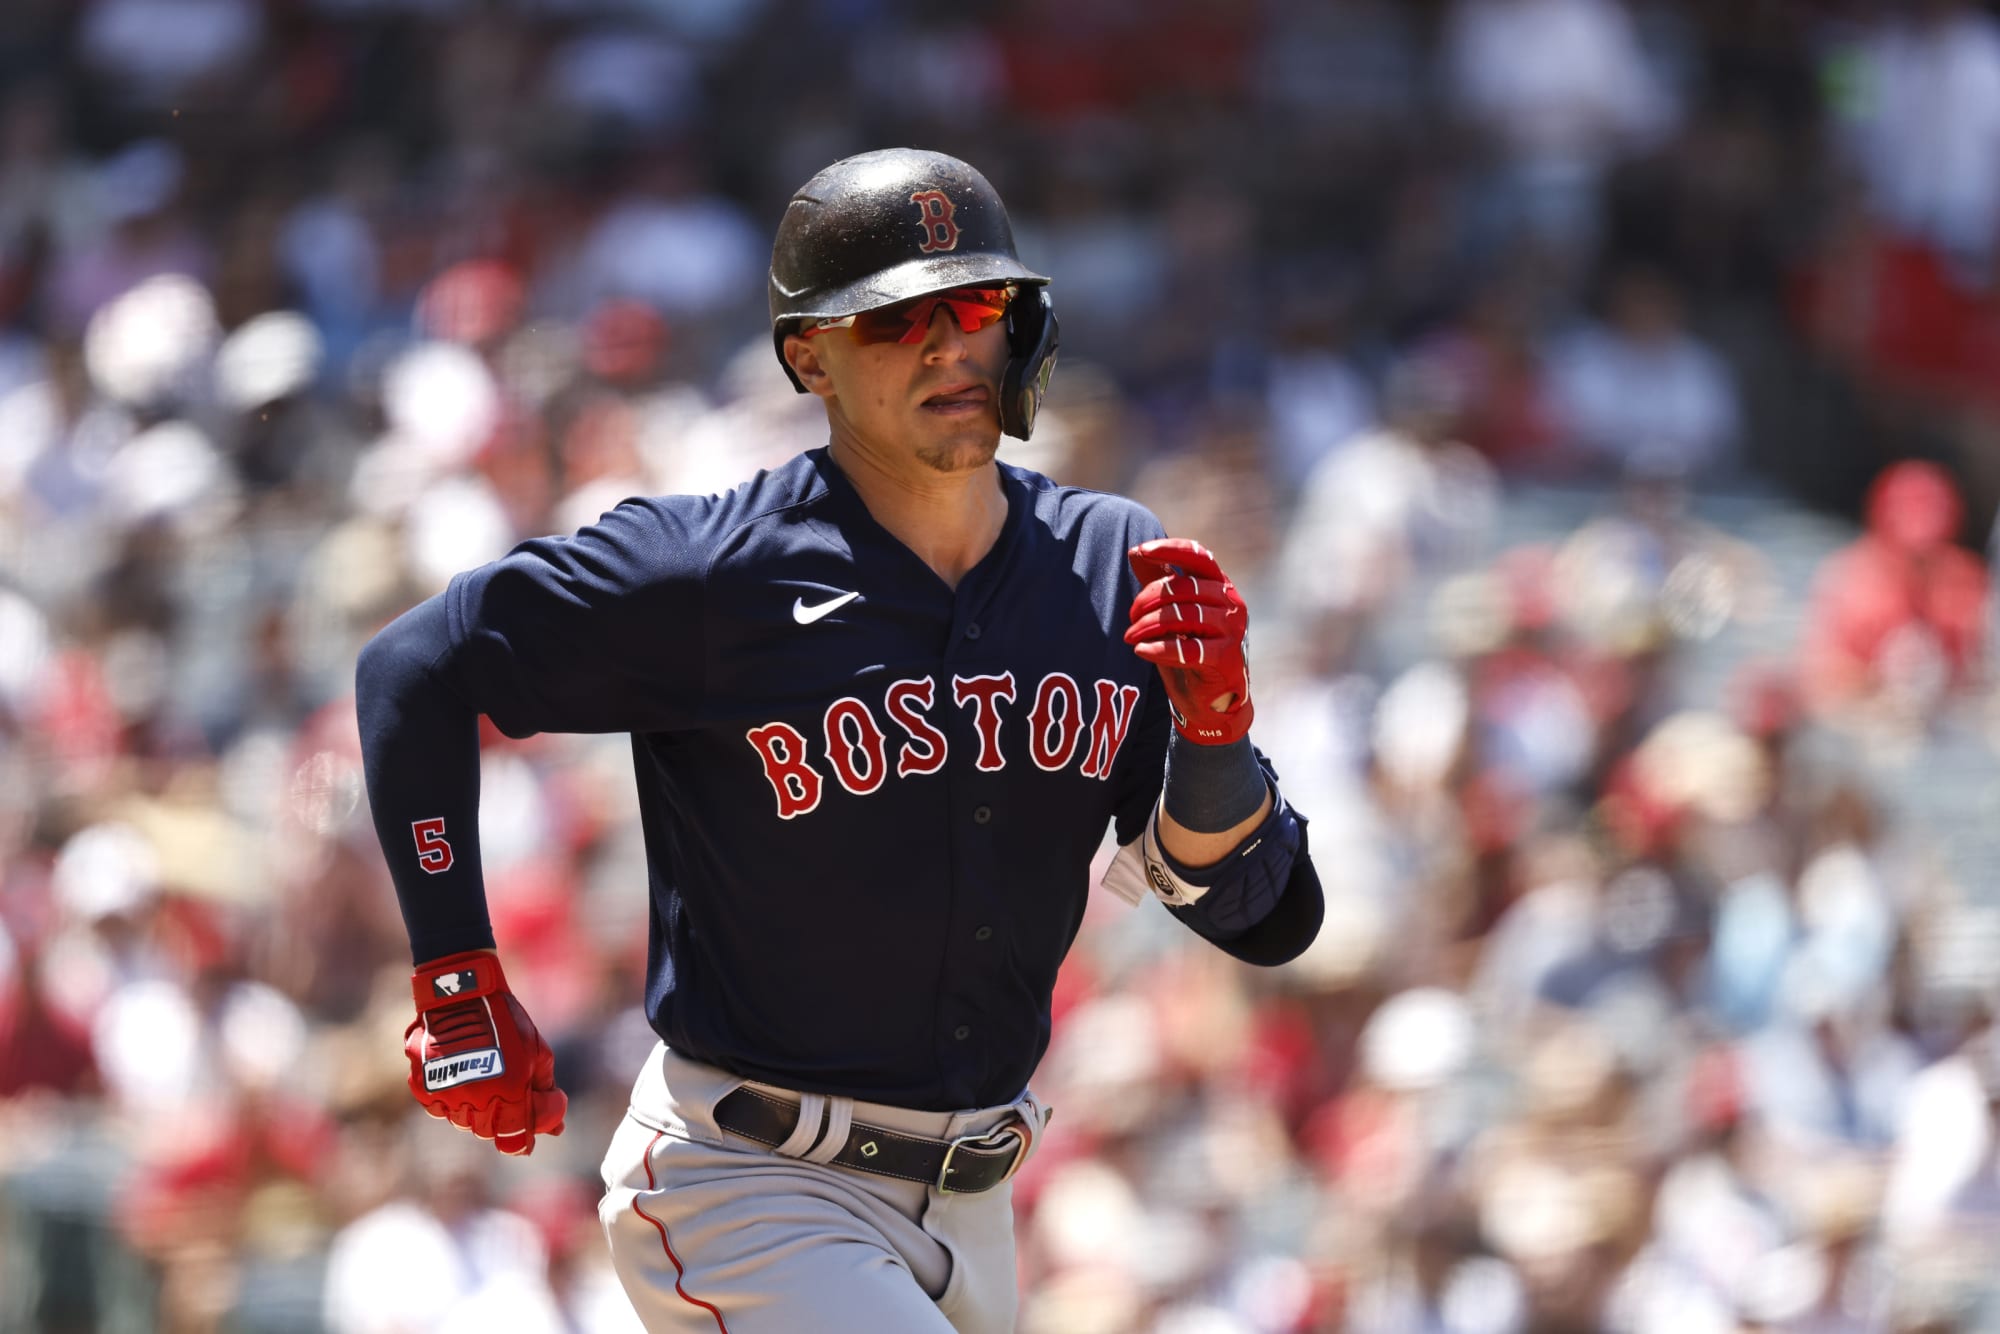 Red Sox Good news for some means bad news for others